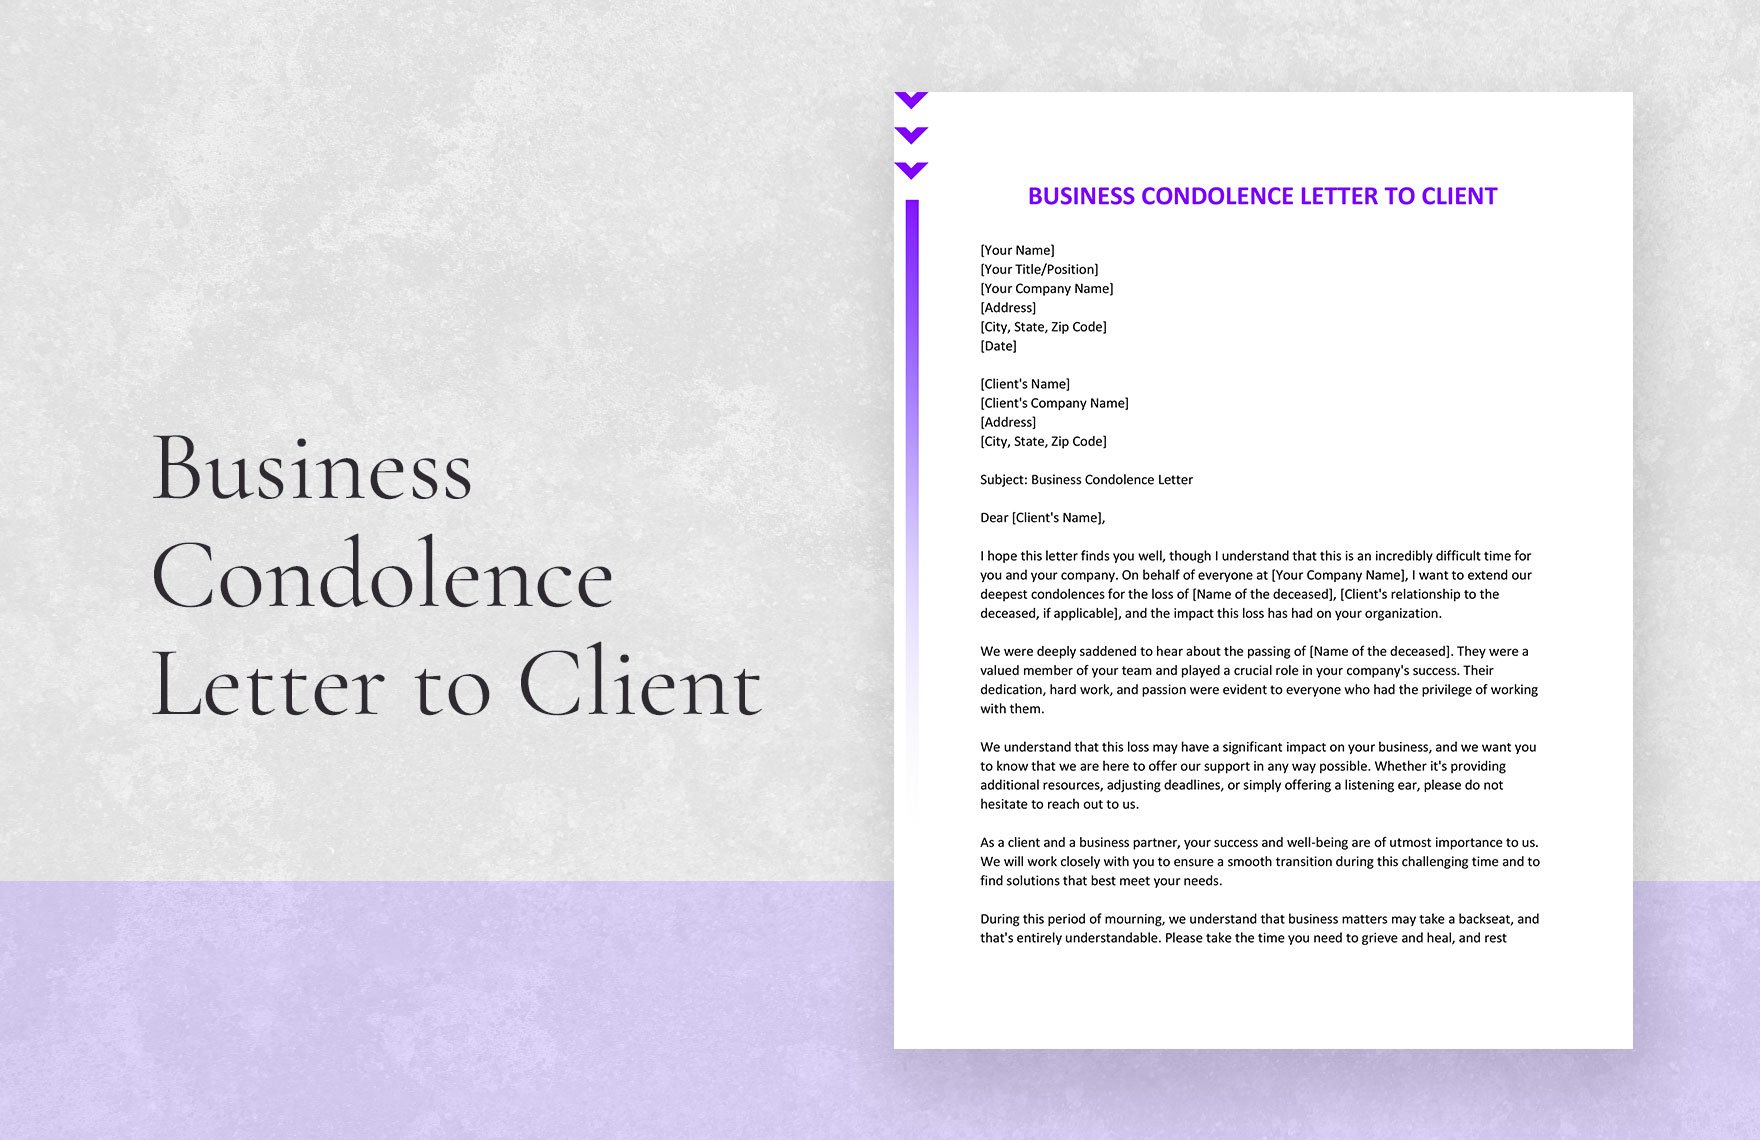 Free Business Condolence Letter to Client